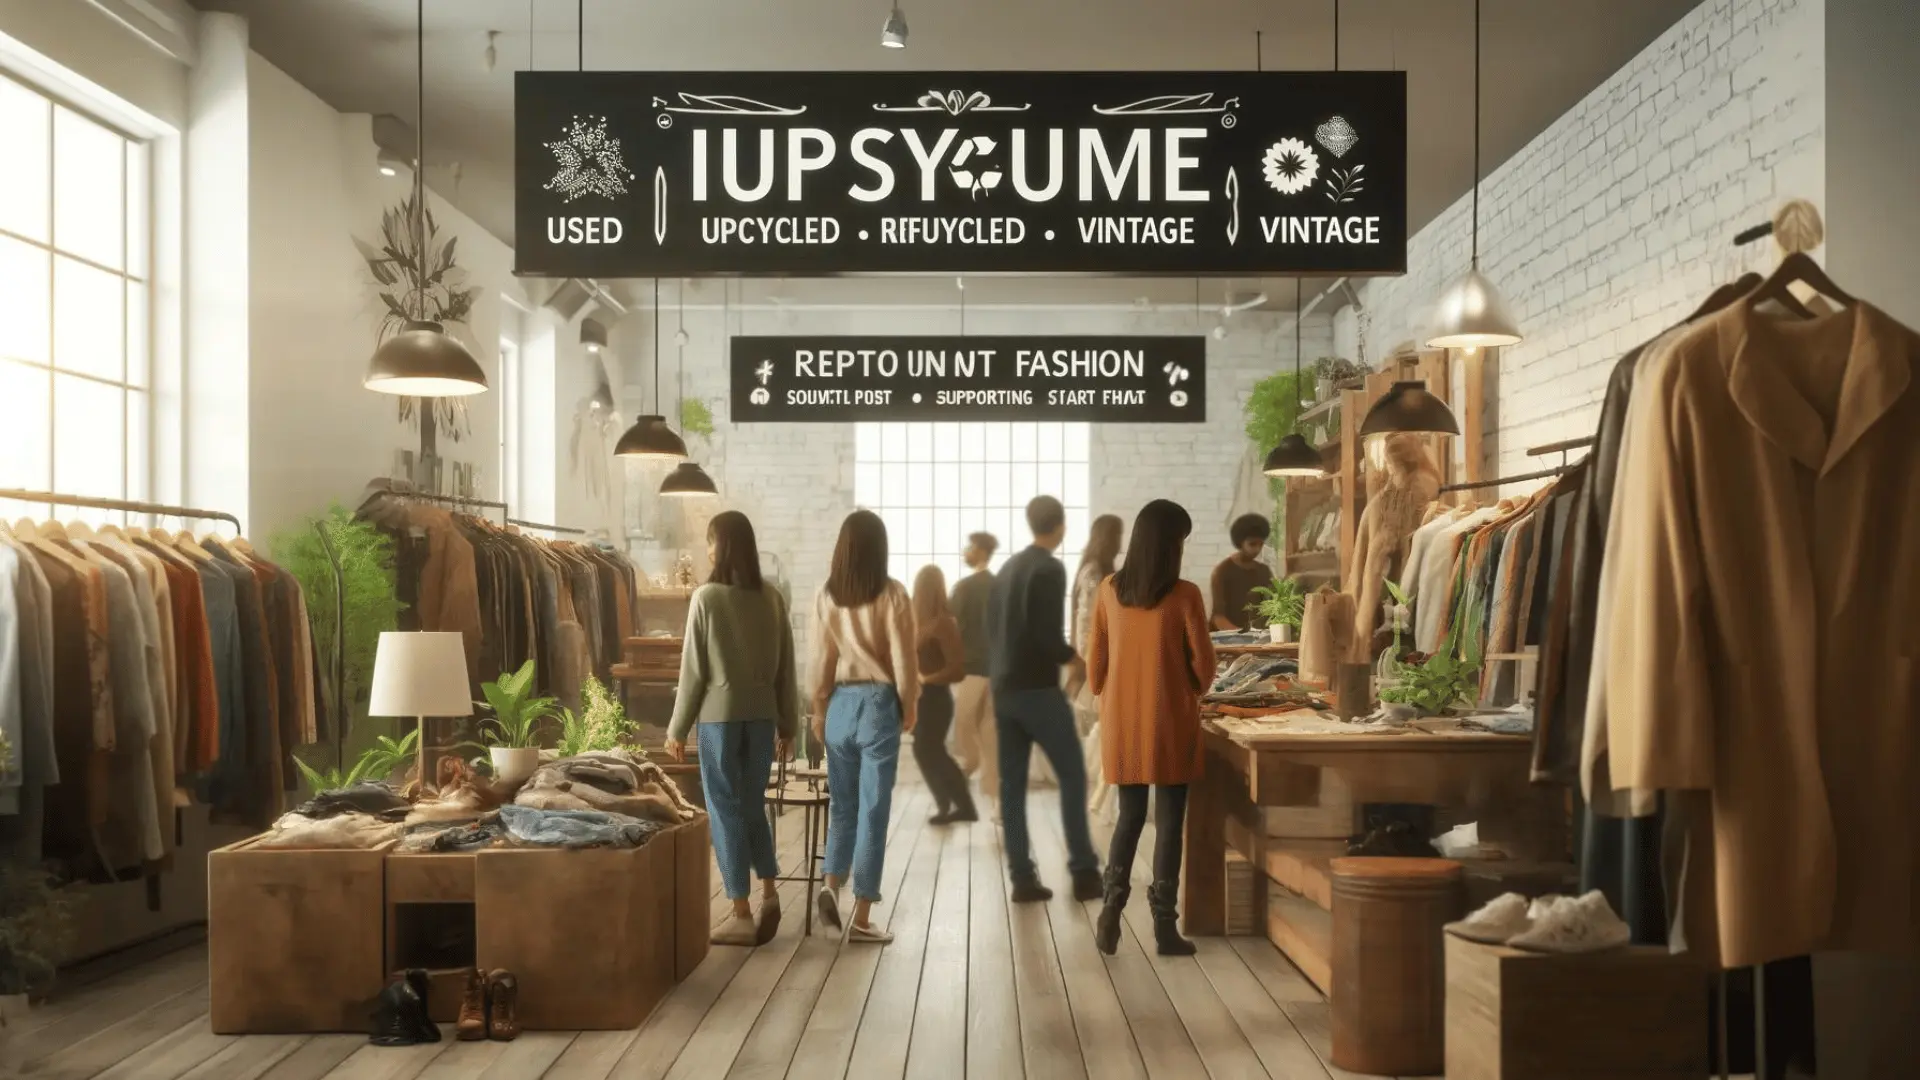 Customers browsing through upcycled and vintage clothes in an eco-friendly fashion store.